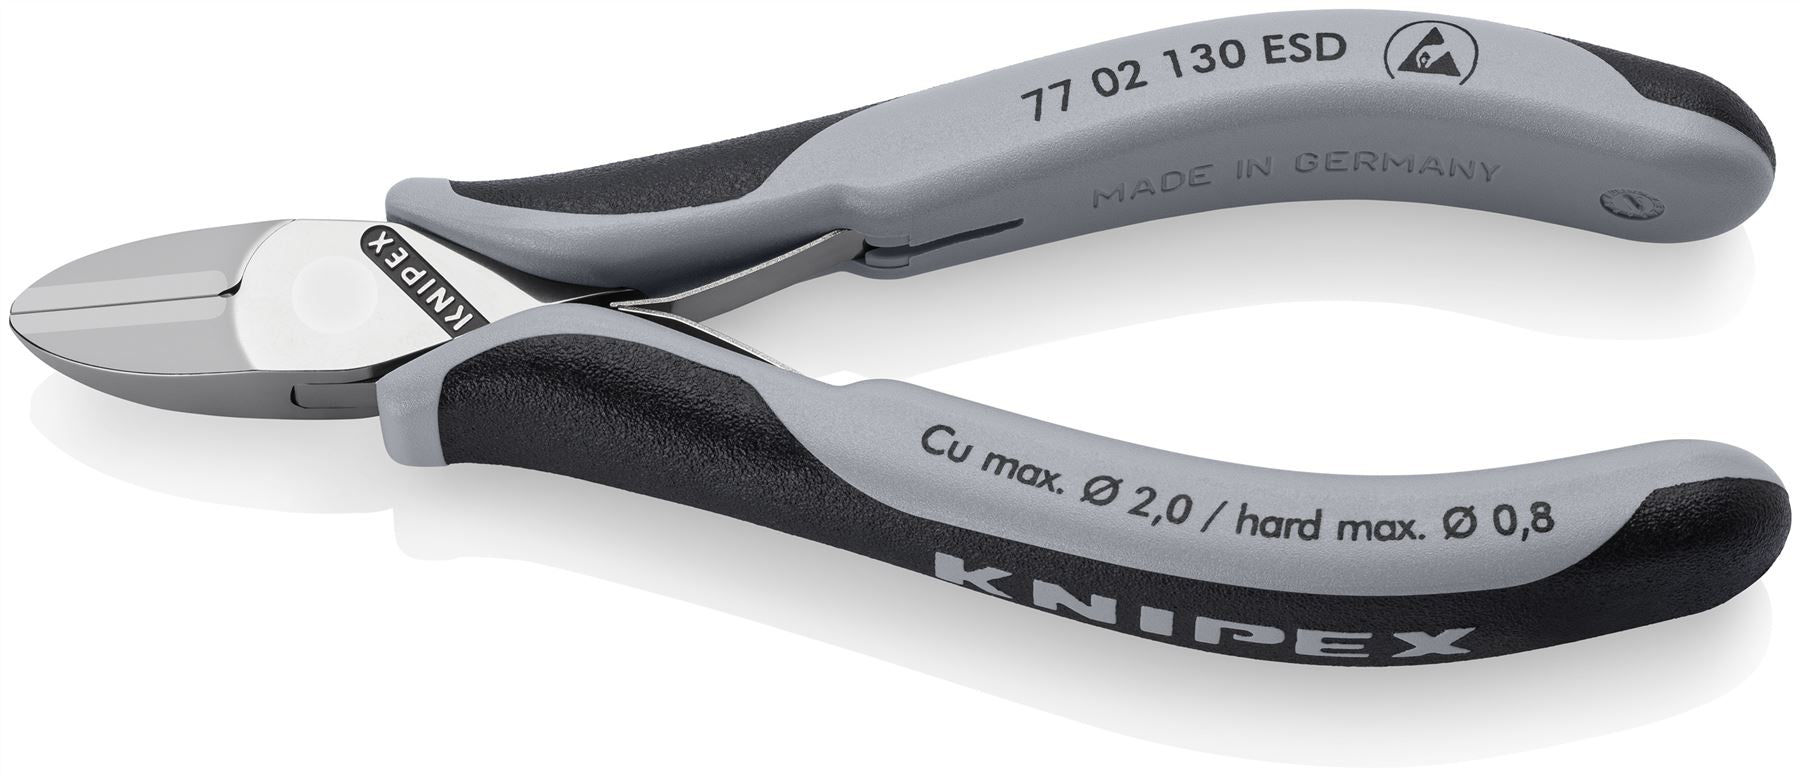 KNIPEX Electronics Diagonal Cutter Pliers with Carbide Cutting Edges 130mm Multi Component Grips 77 02 130 ESD